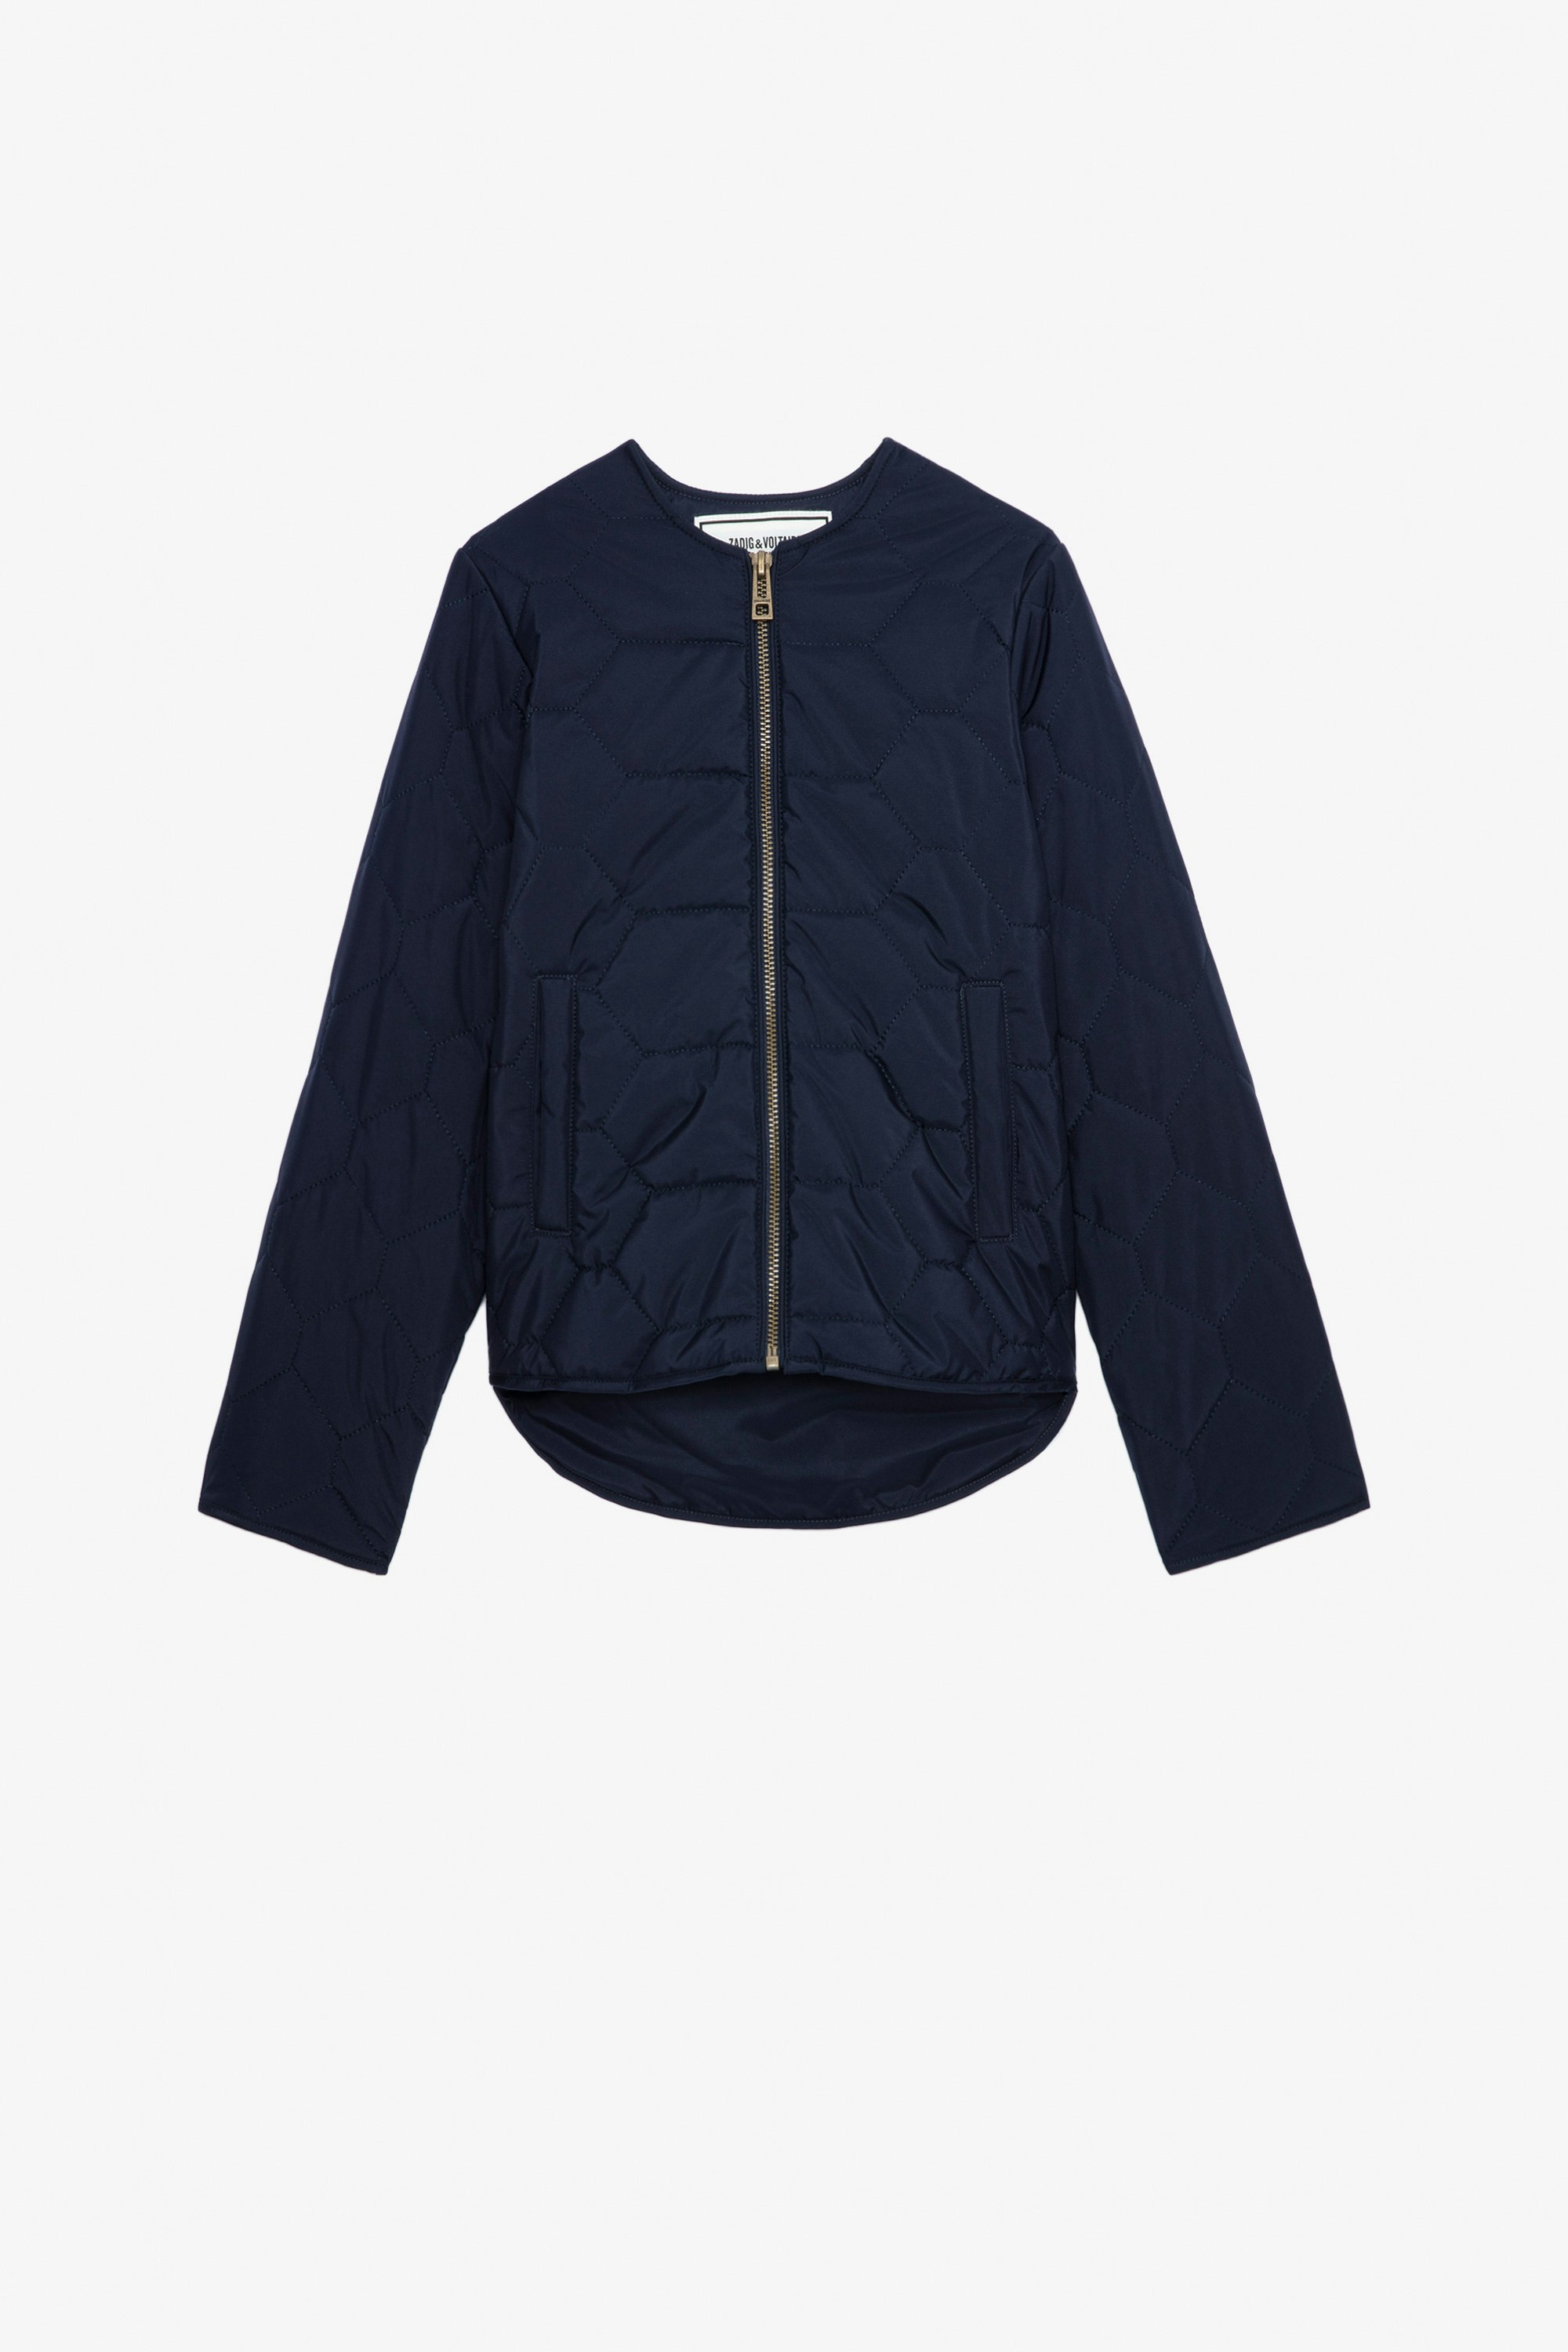 Girls’ Clide Jacket Girls’ navy blue quilted recycled polyester jacket with “Bonheur” embroidery and wings.